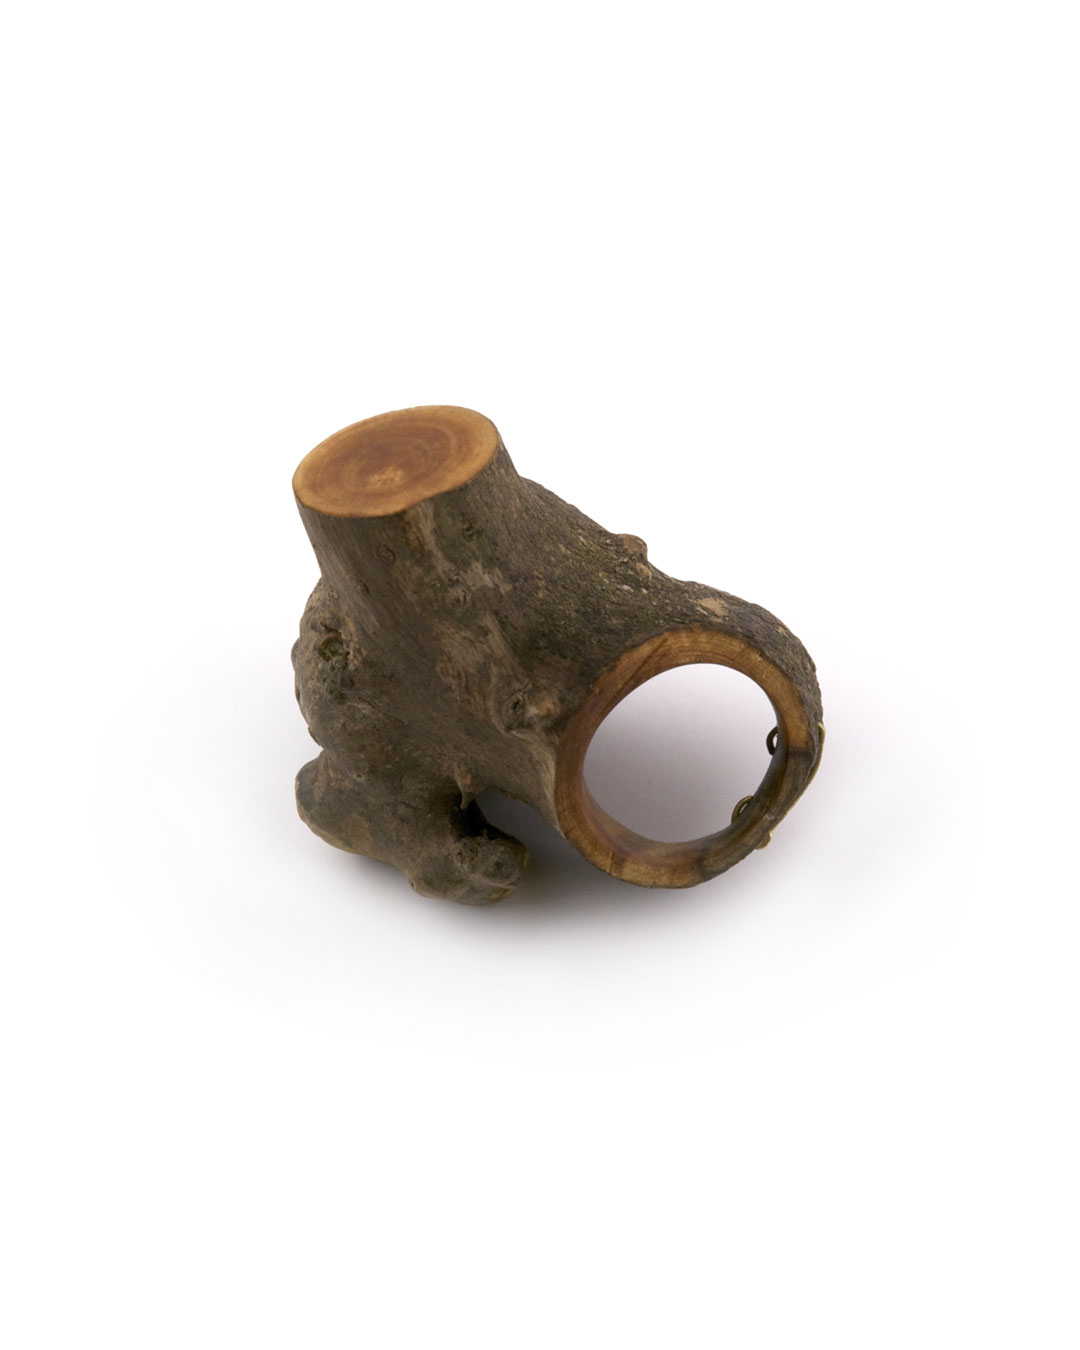 Jenny Klemming, Facet, 2011, ring; apple wood, 18ct gold, lacquer, 52 x 38 x 44 mm, €835